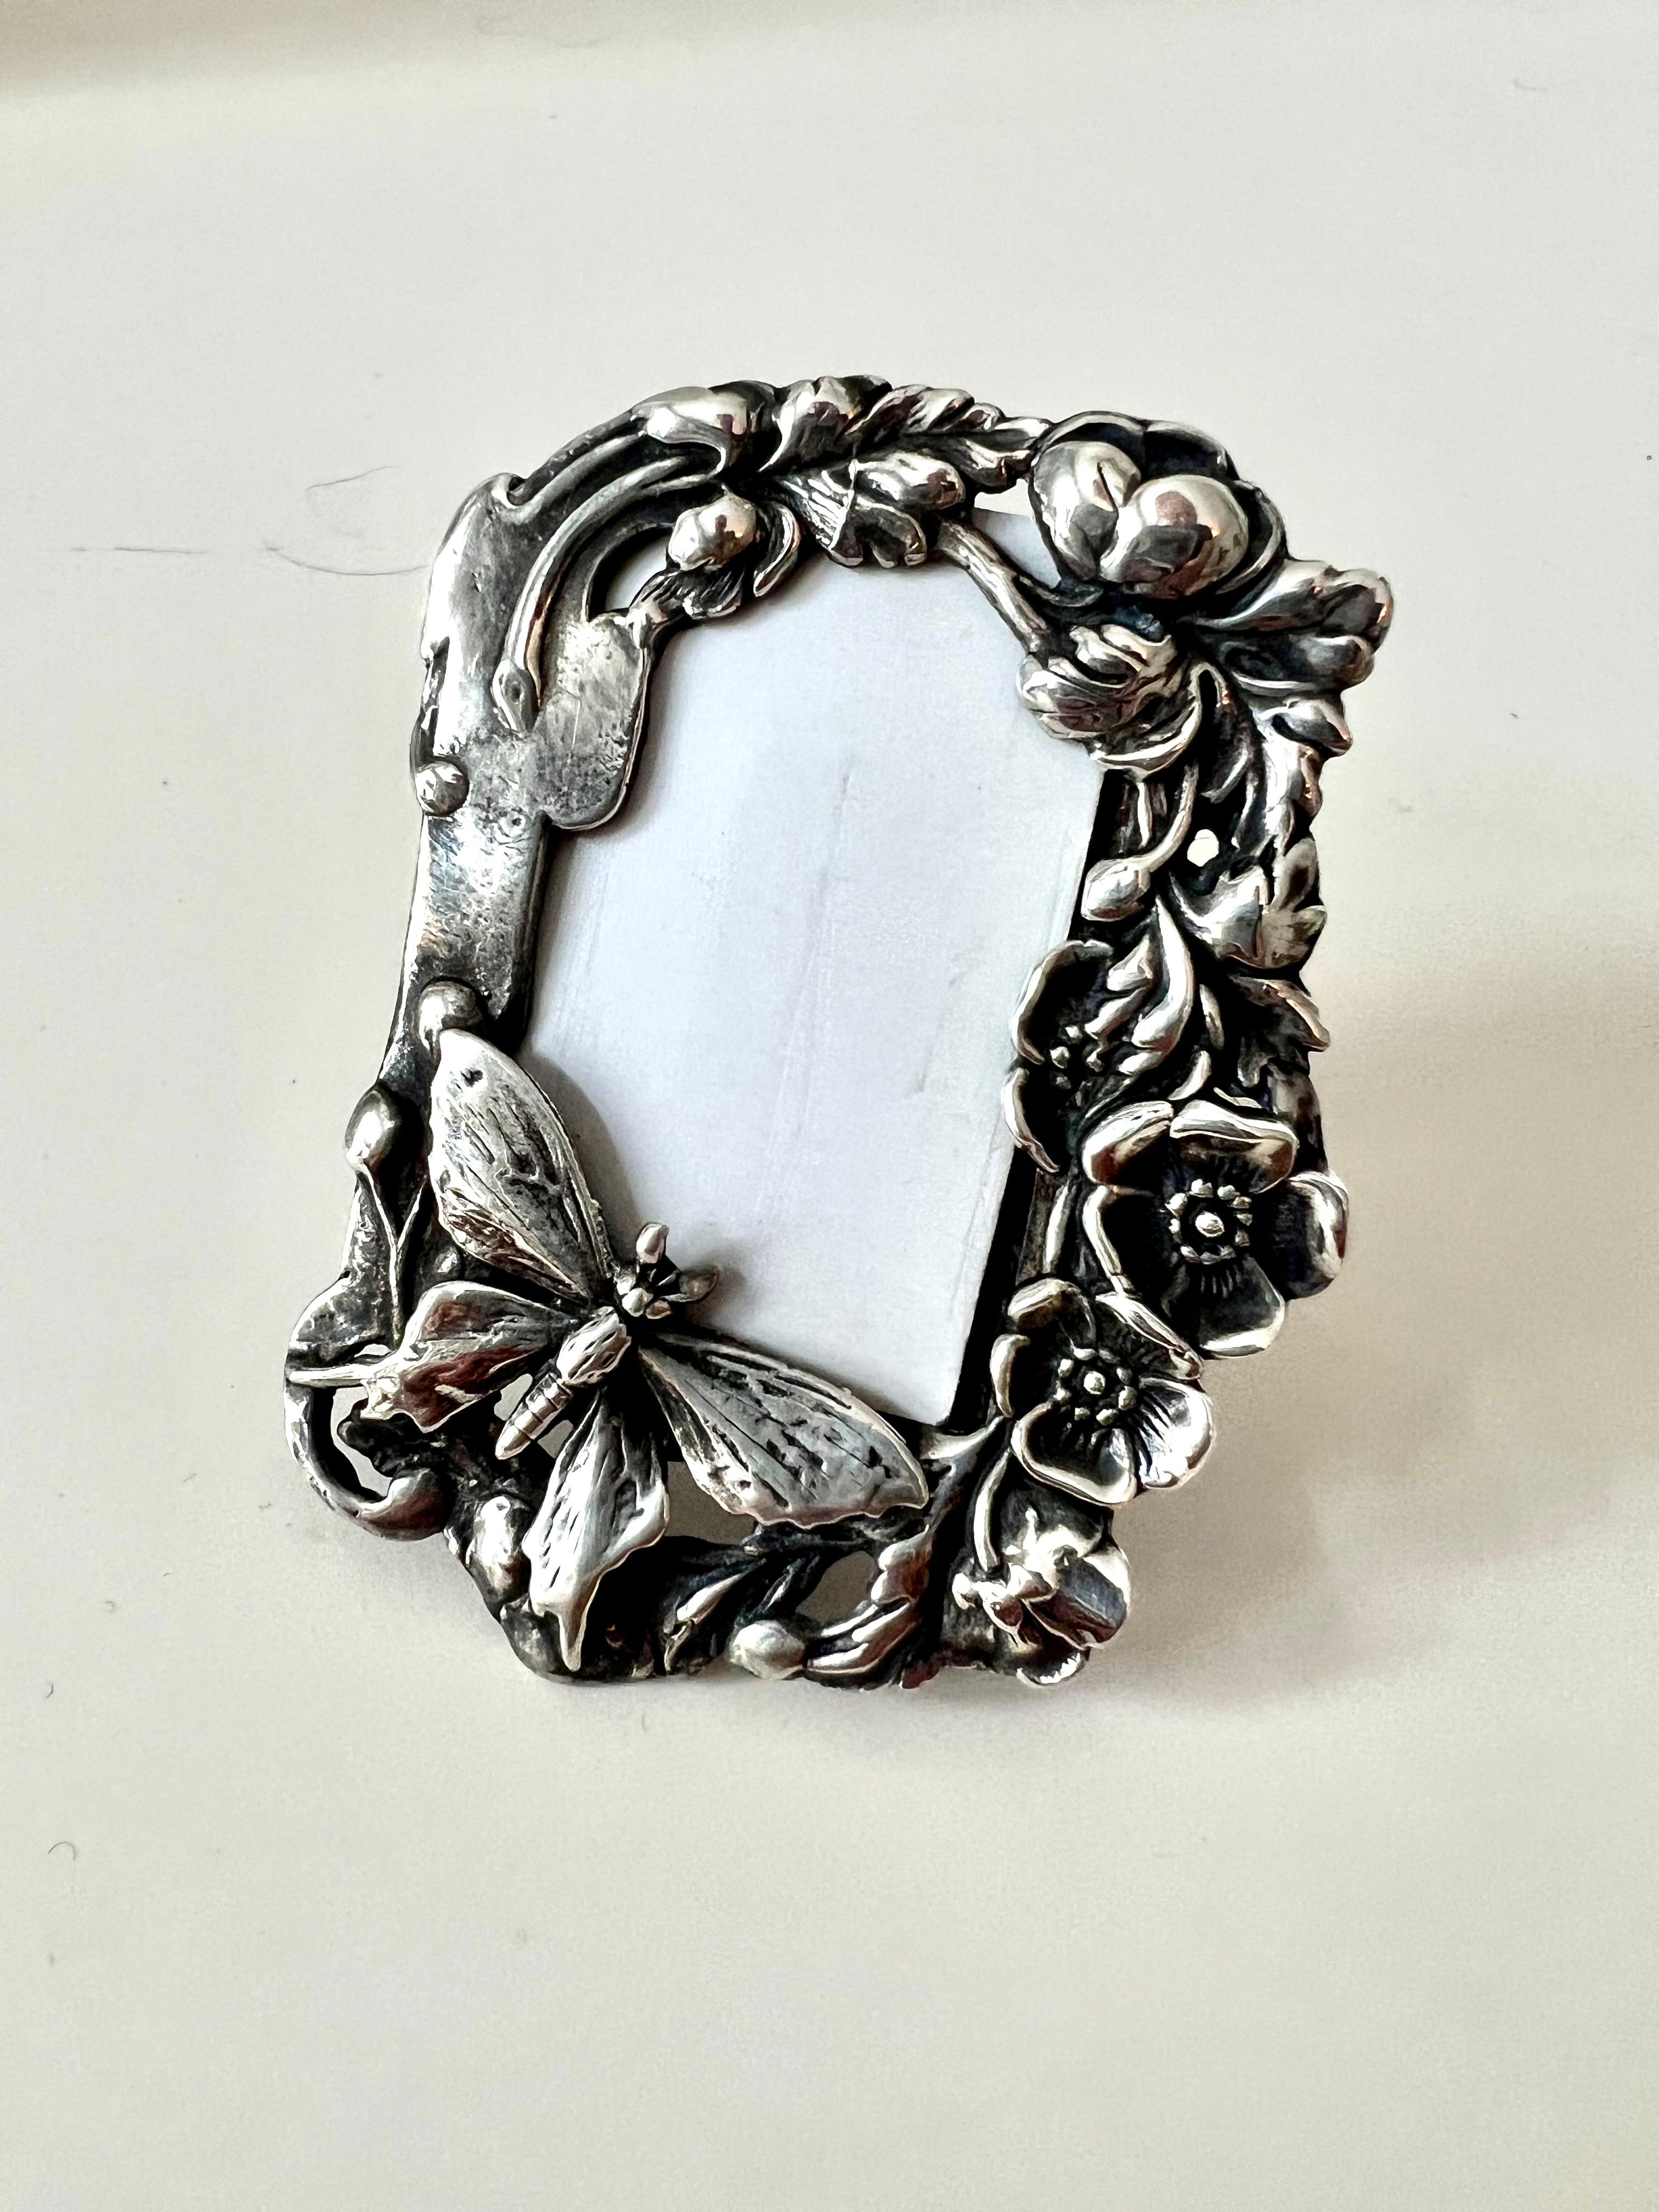 A beautiful small sterling picture frame with flowers, and butterfly - the frame is ideal for bedside, a desk, or special collection of mementos.  

We also think it's the perfect frame to carry your loved one in while traveling.

A great wedding